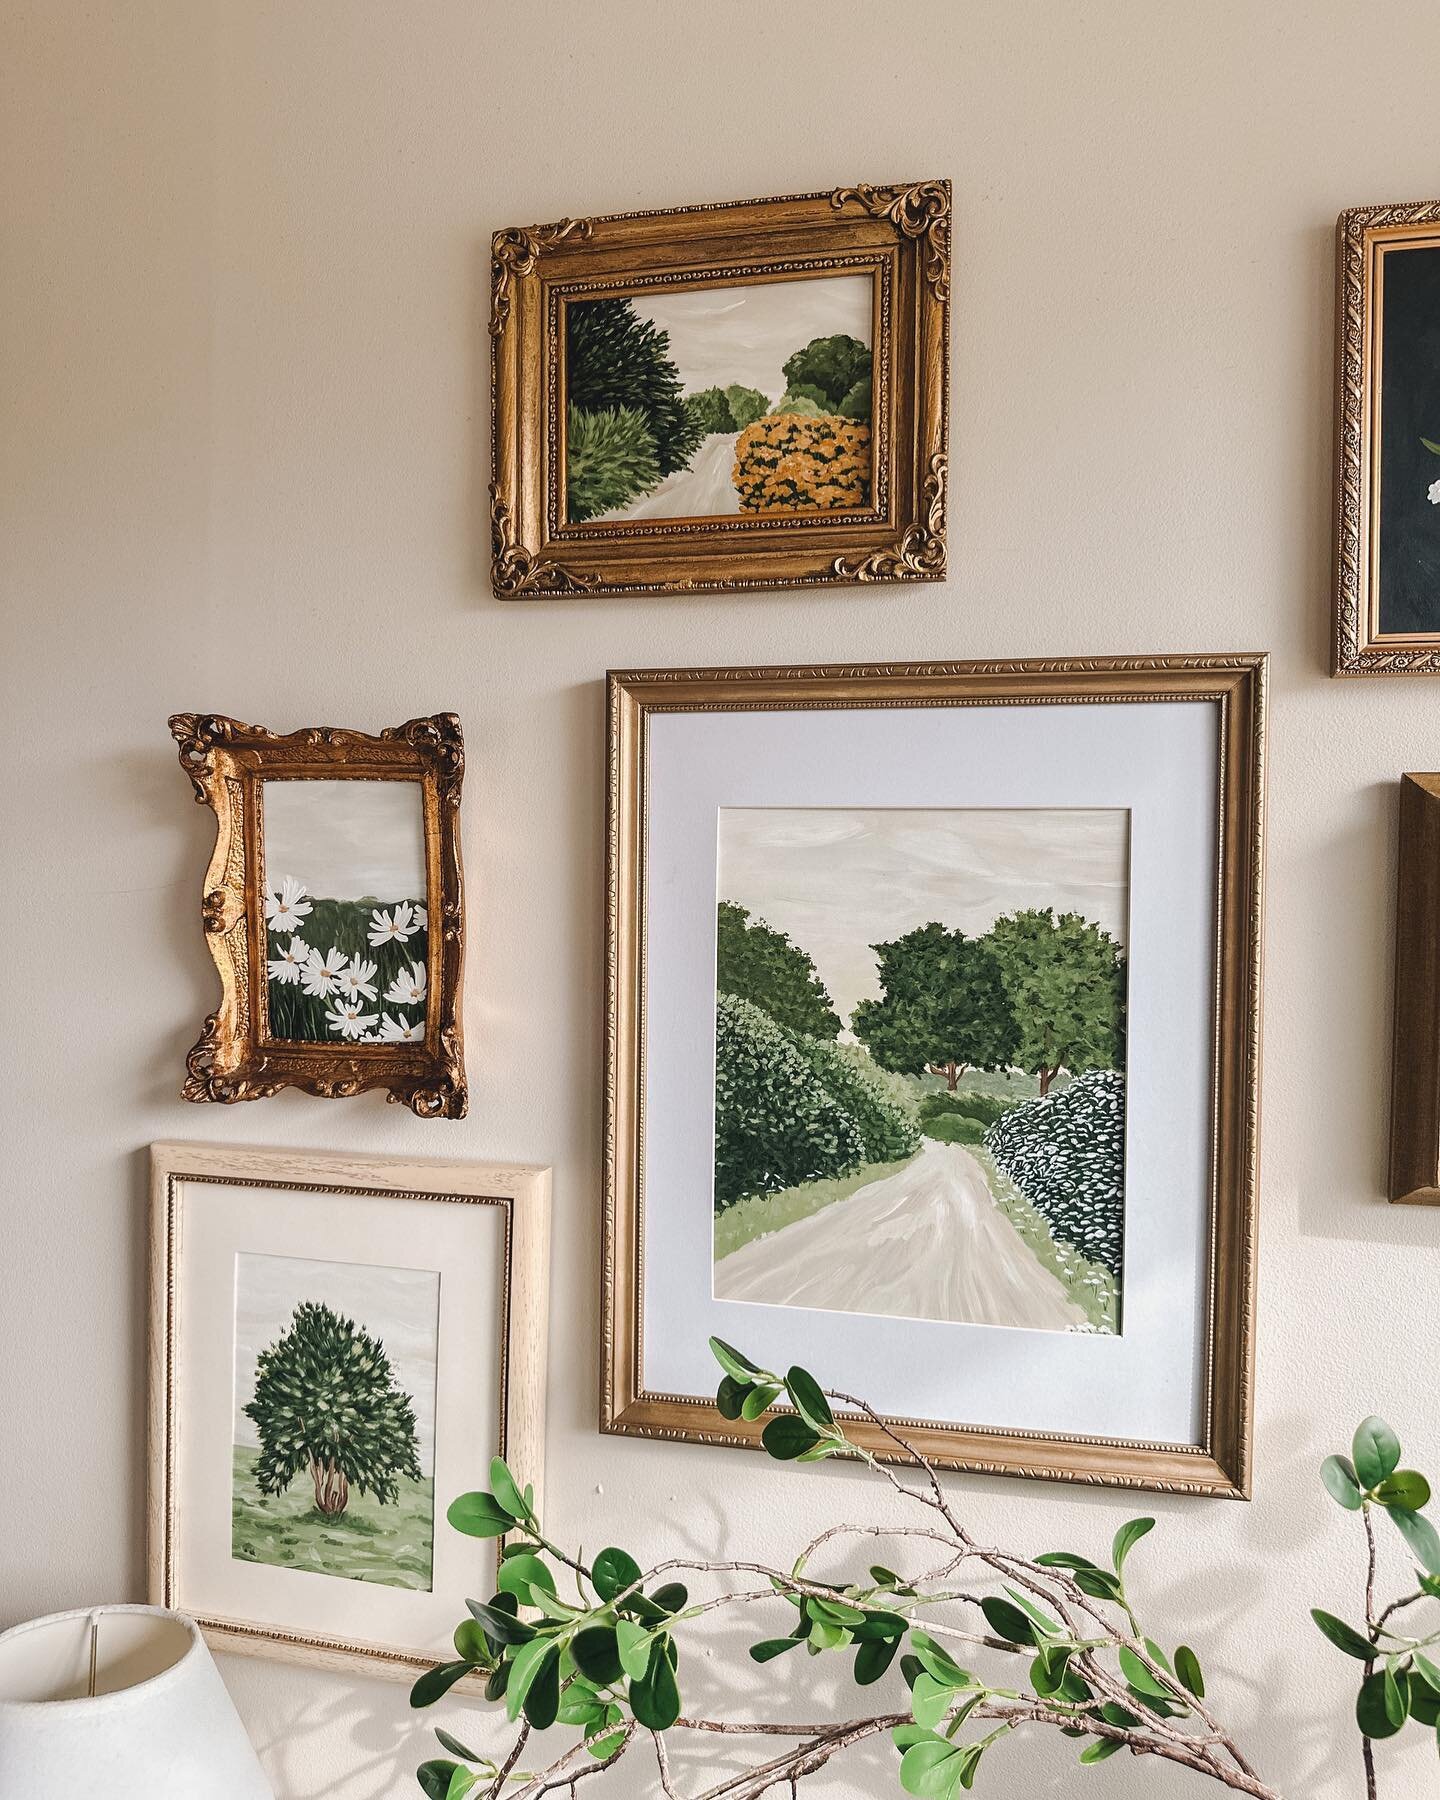 Make your walls feel a little extra special with these timeless and moody works of art. Whether it&rsquo;s the originals or prints, these pieces are sure to make a statement in your home. Shop the link in bio
⠀⠀⠀⠀⠀⠀⠀⠀⠀
#antiqueart #acrylicpainting #p